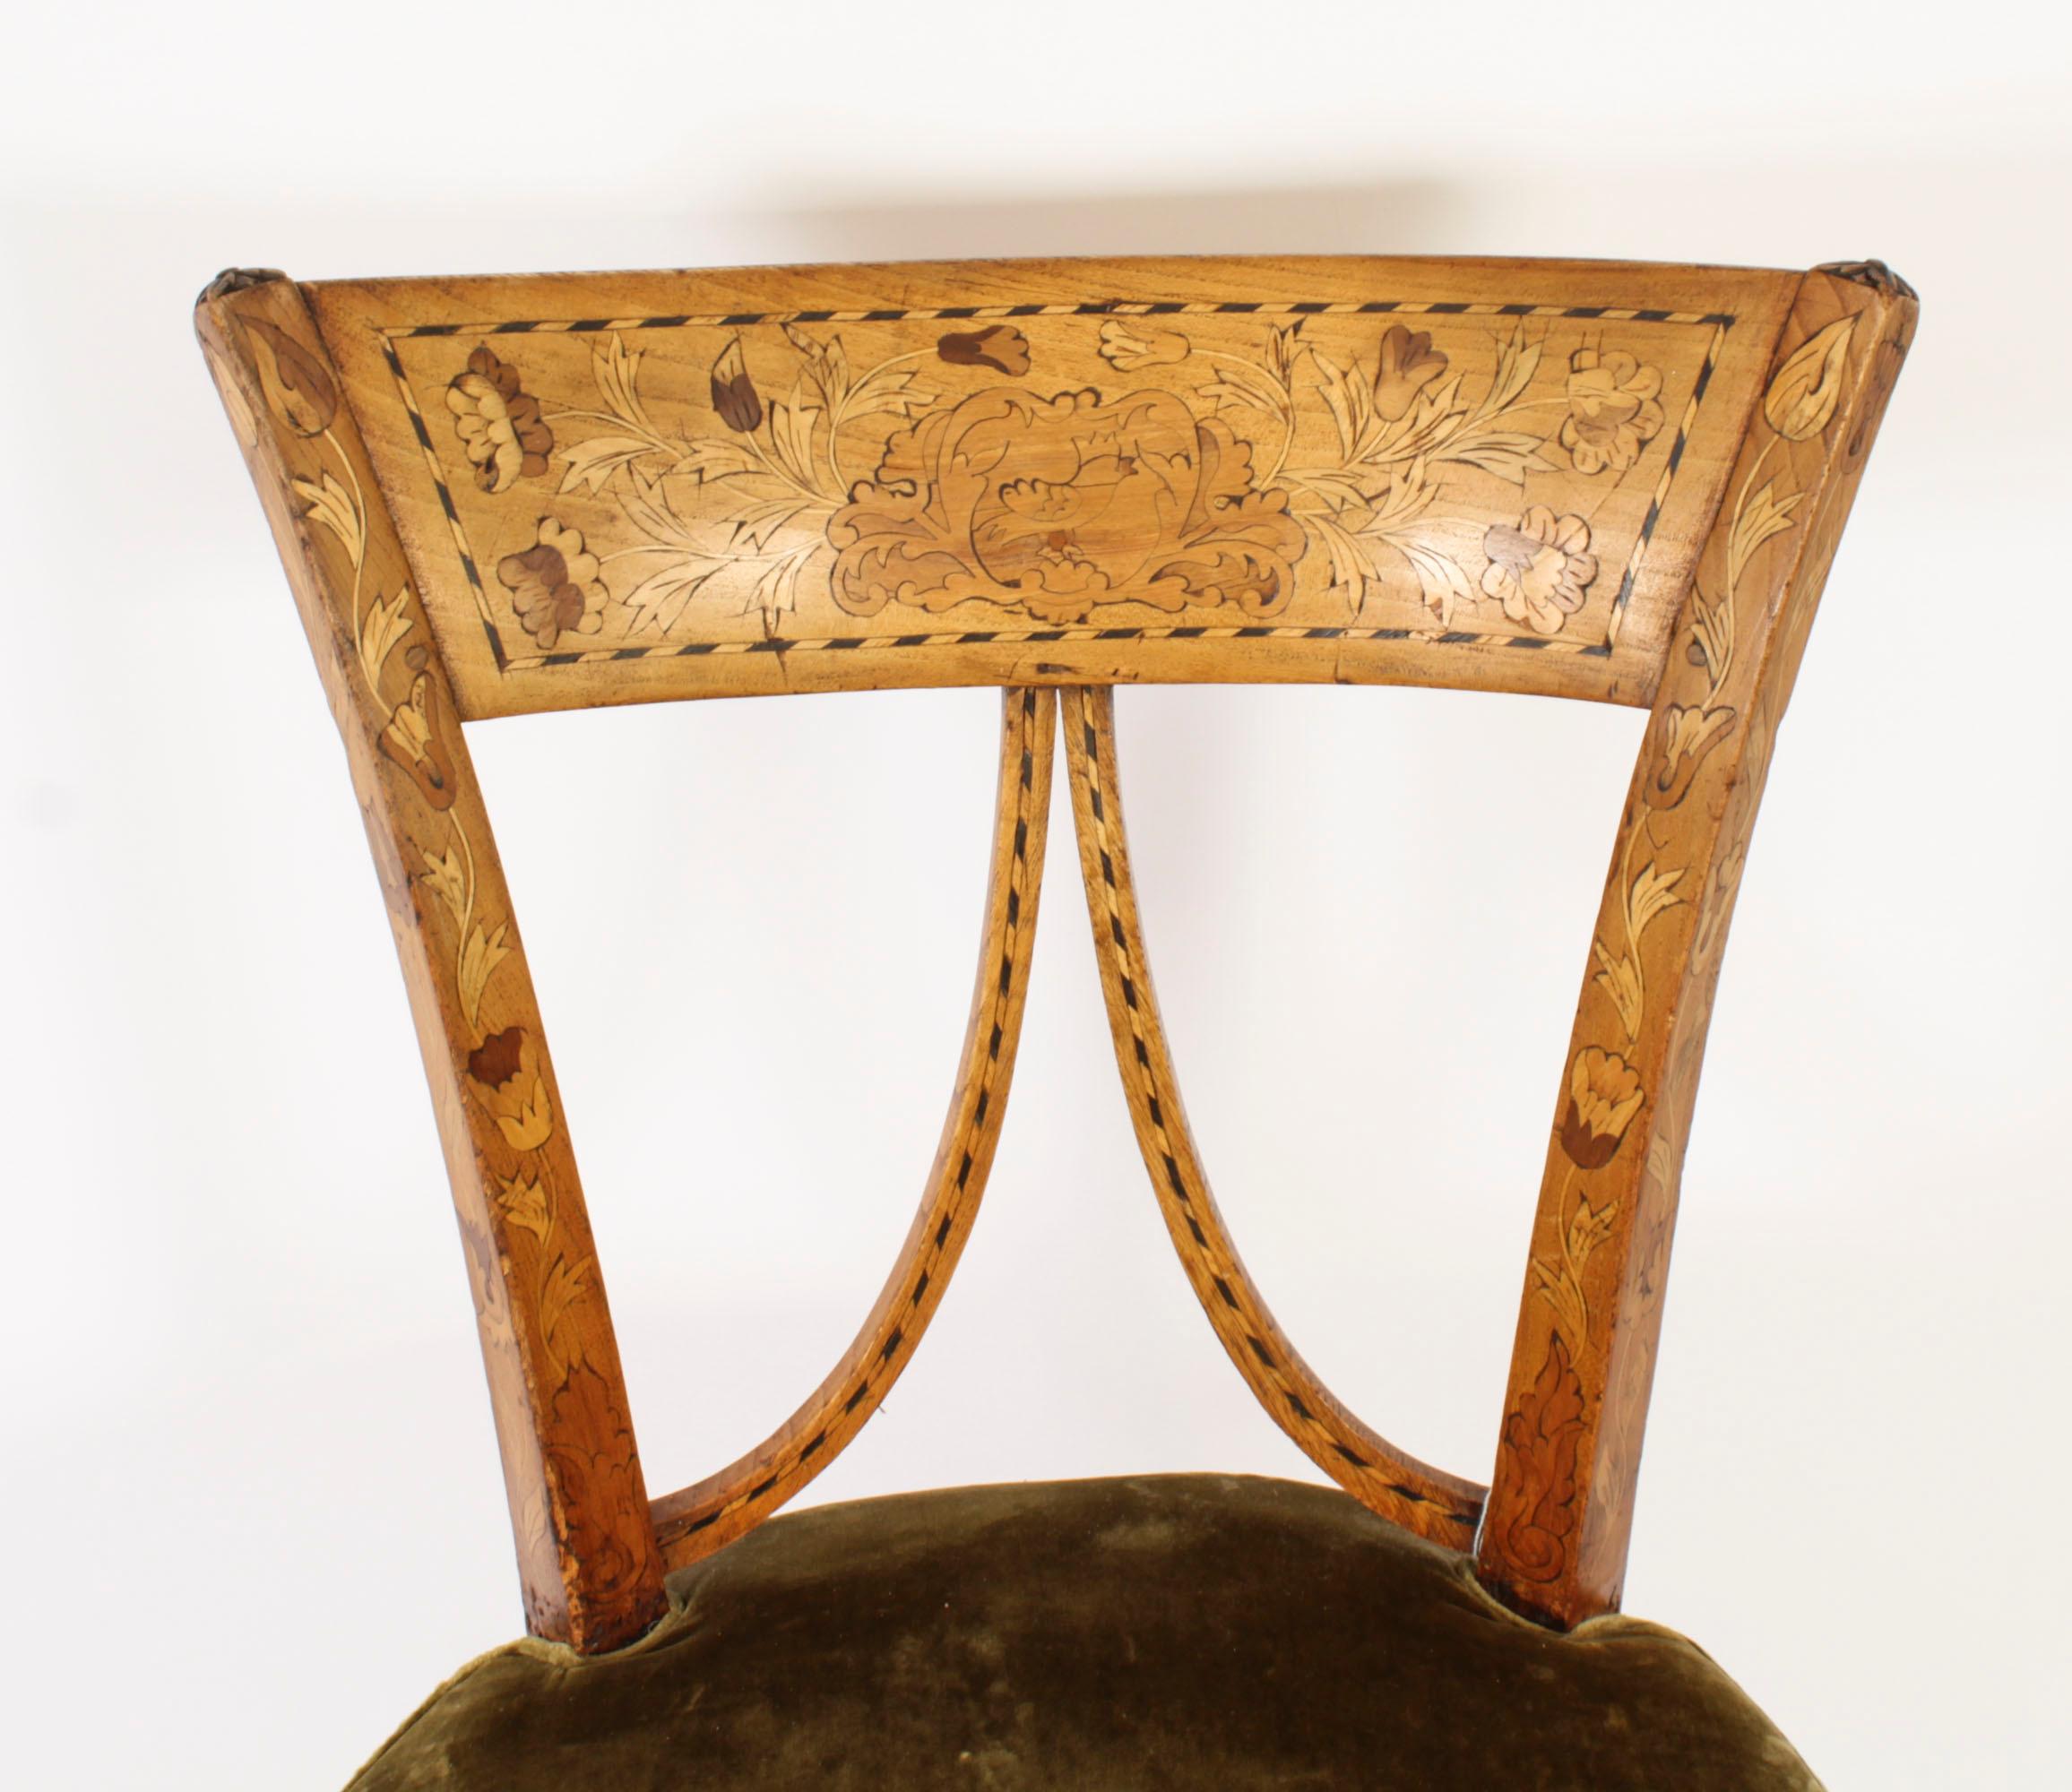 English Antique Dutch Satinwood Marquetry Desk Chair 19th Century